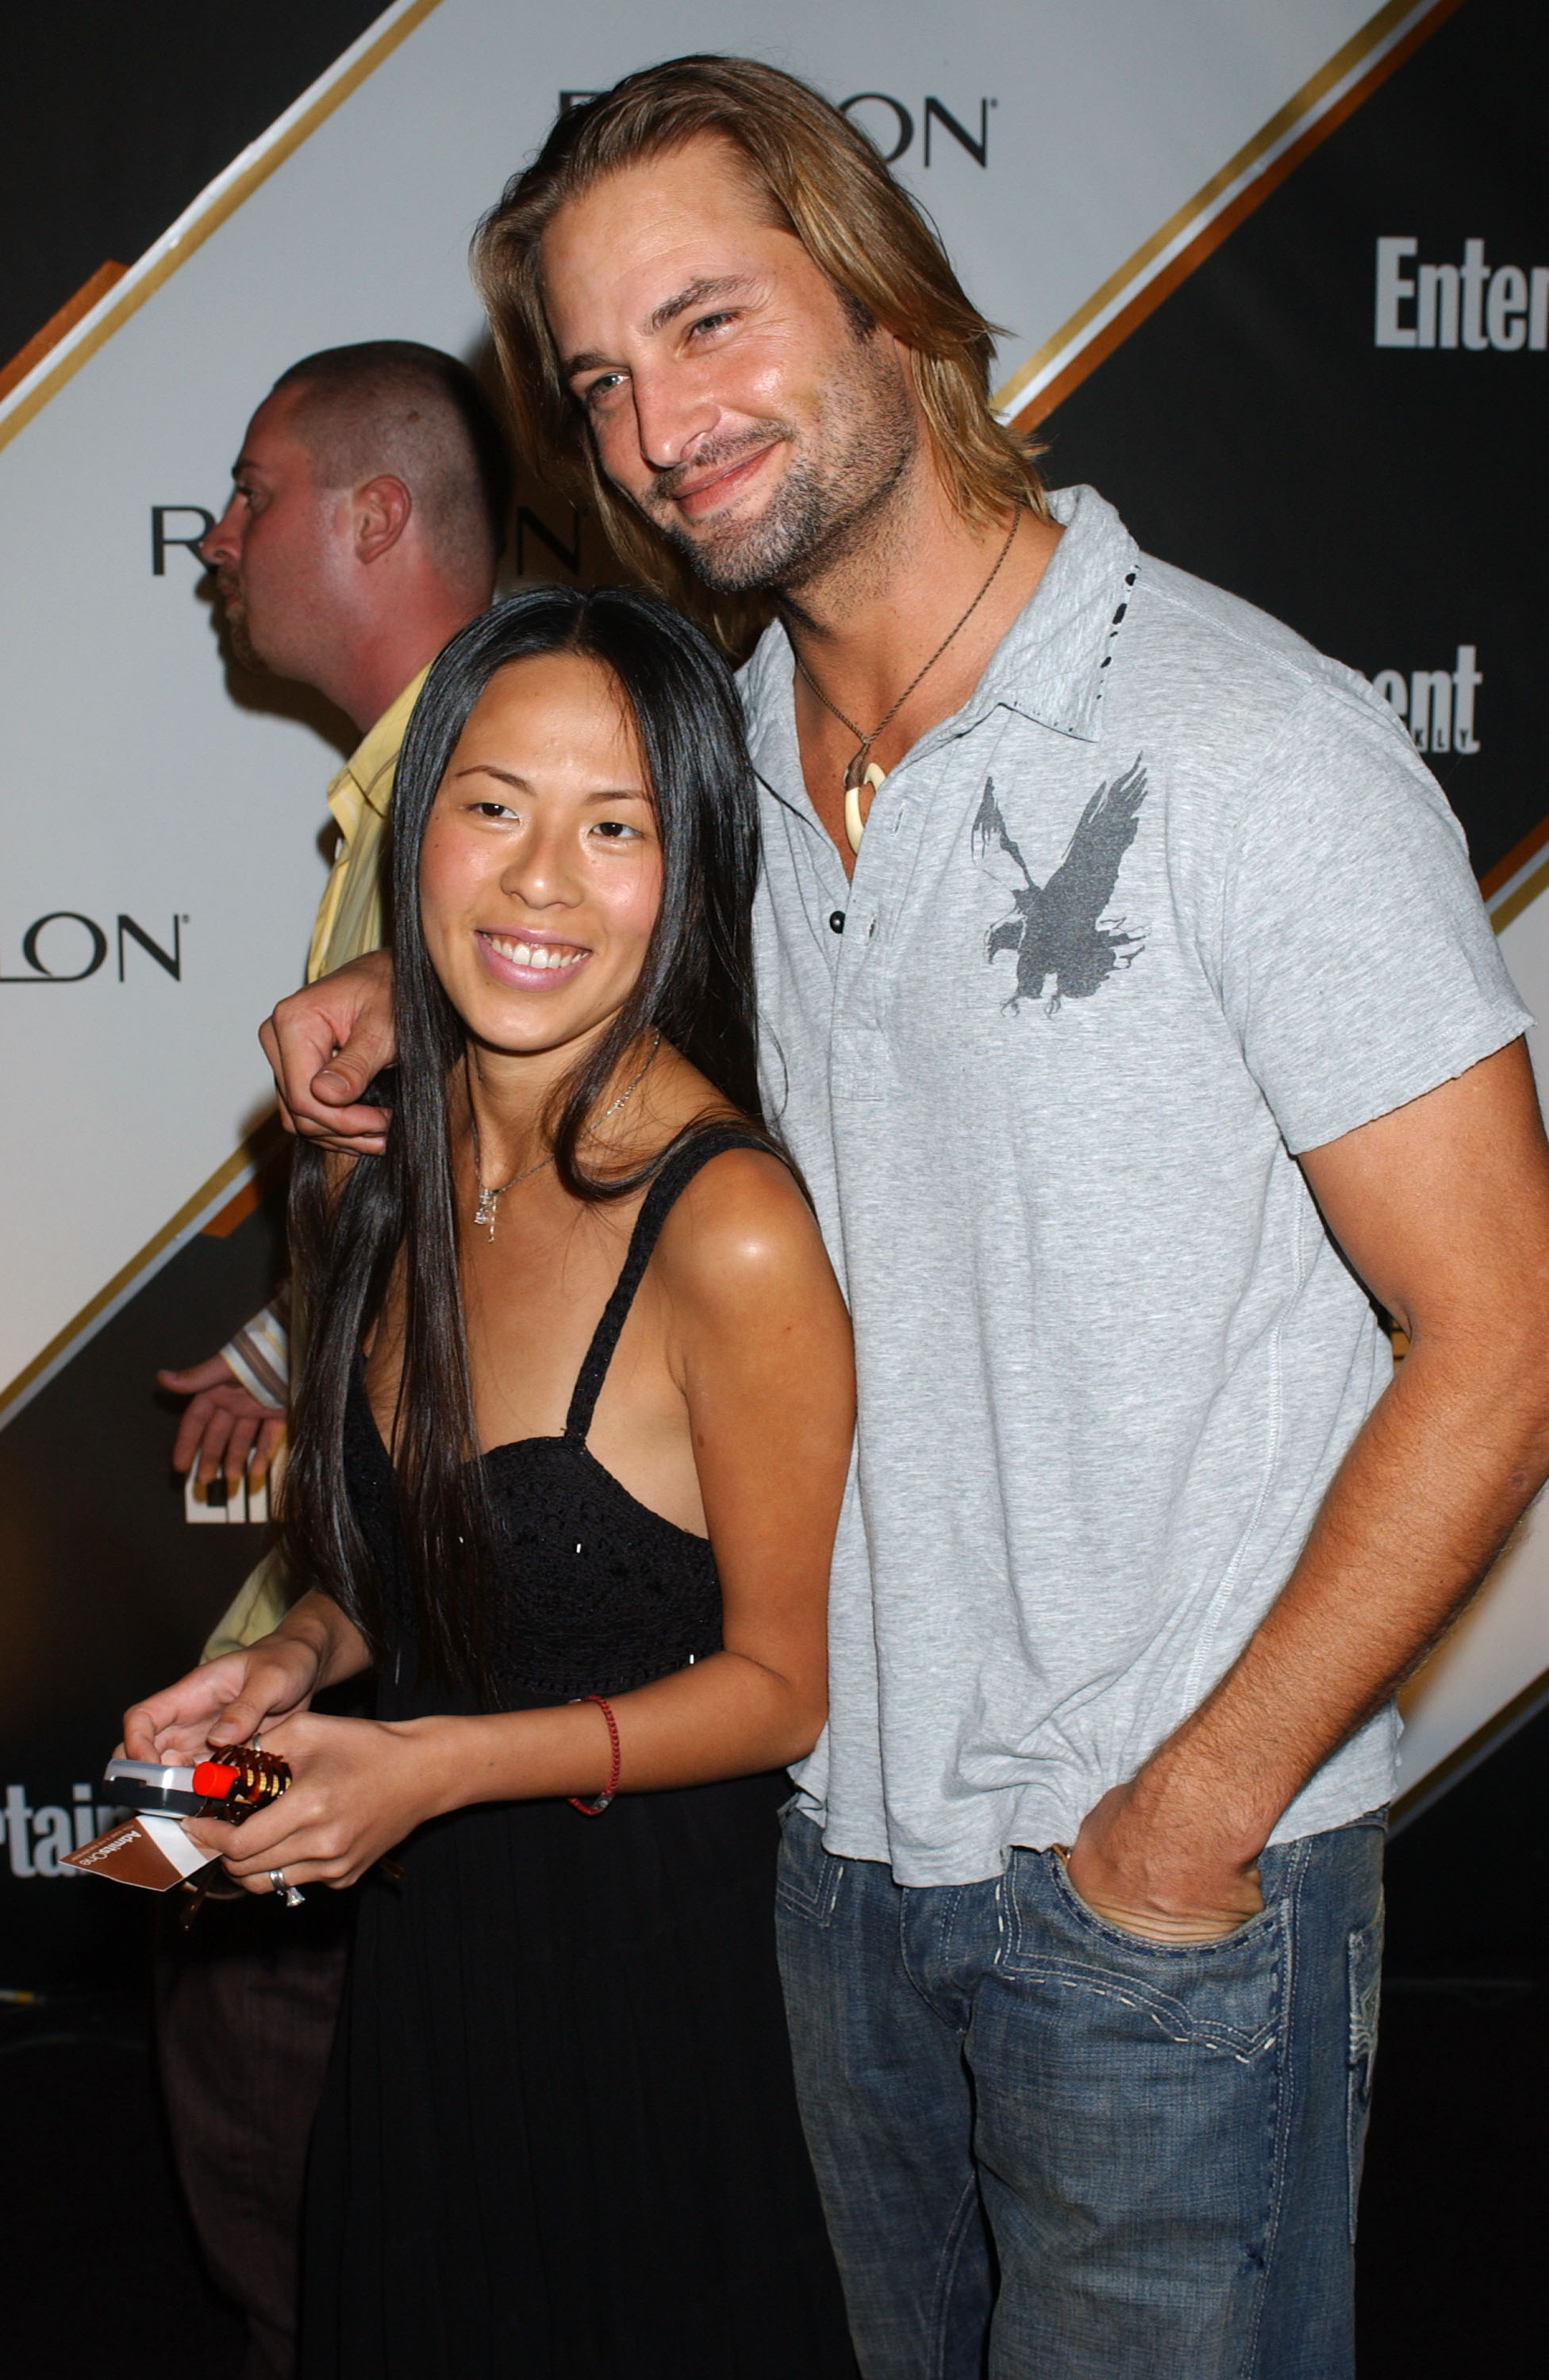 Yessica Kumala and Josh Holloway during Entertainment Weekly Magazine 3rd Annual Pre-Emmy Party in Los Angeles, California, on September 17, 2005 | Source: Getty Images